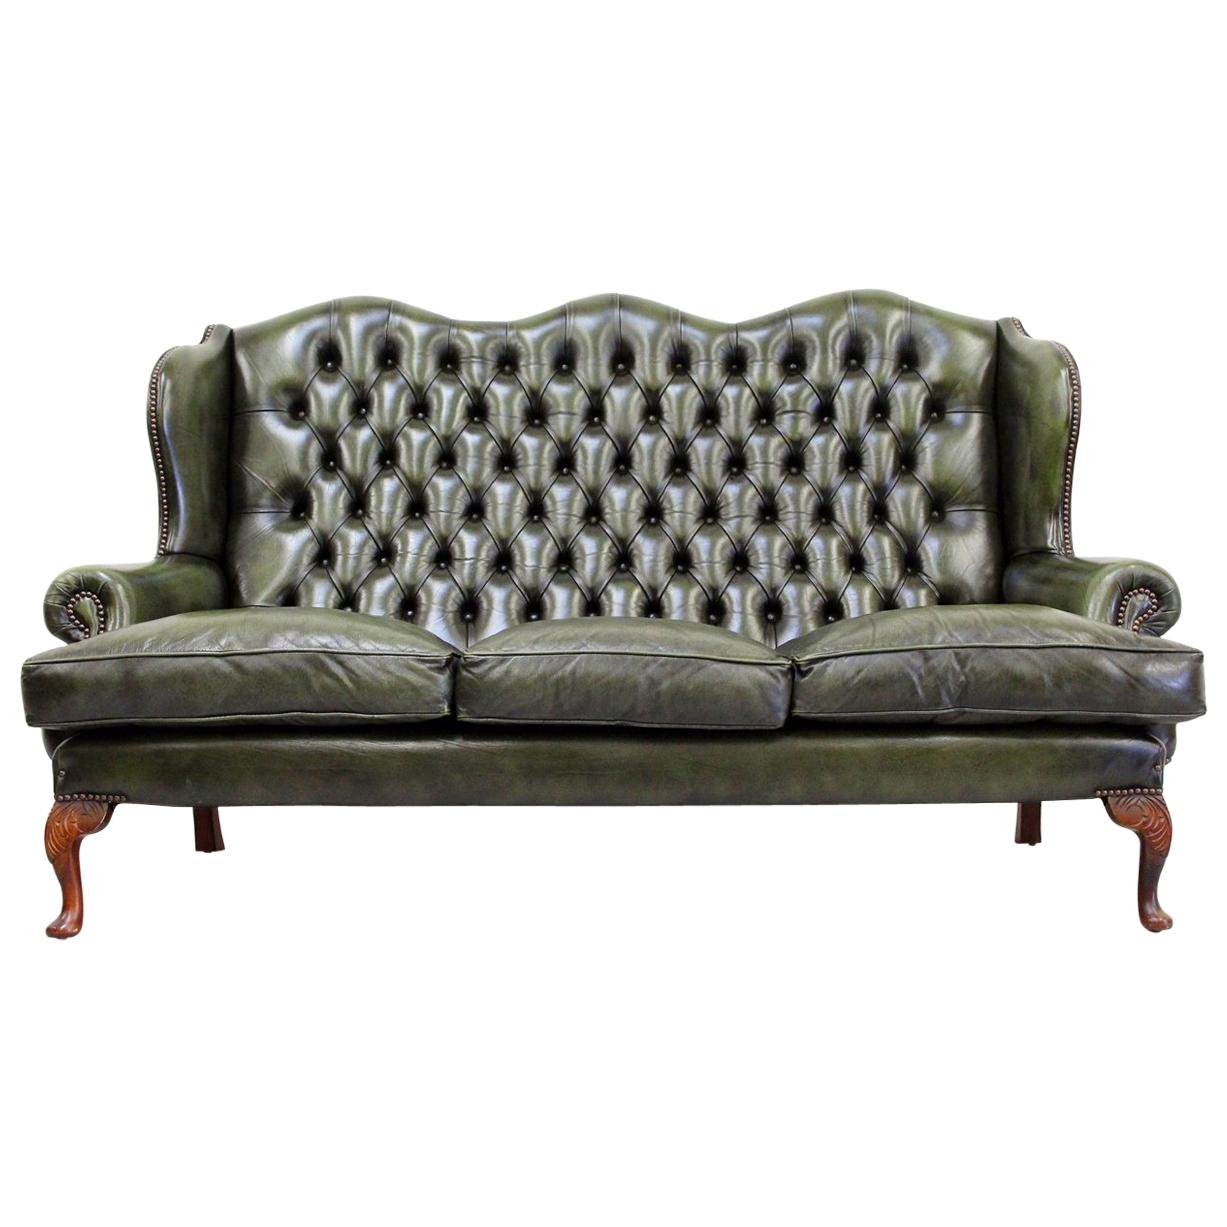 Chesterfield Vintage Chippendale English Sofa Leder Antik Couch For Sale